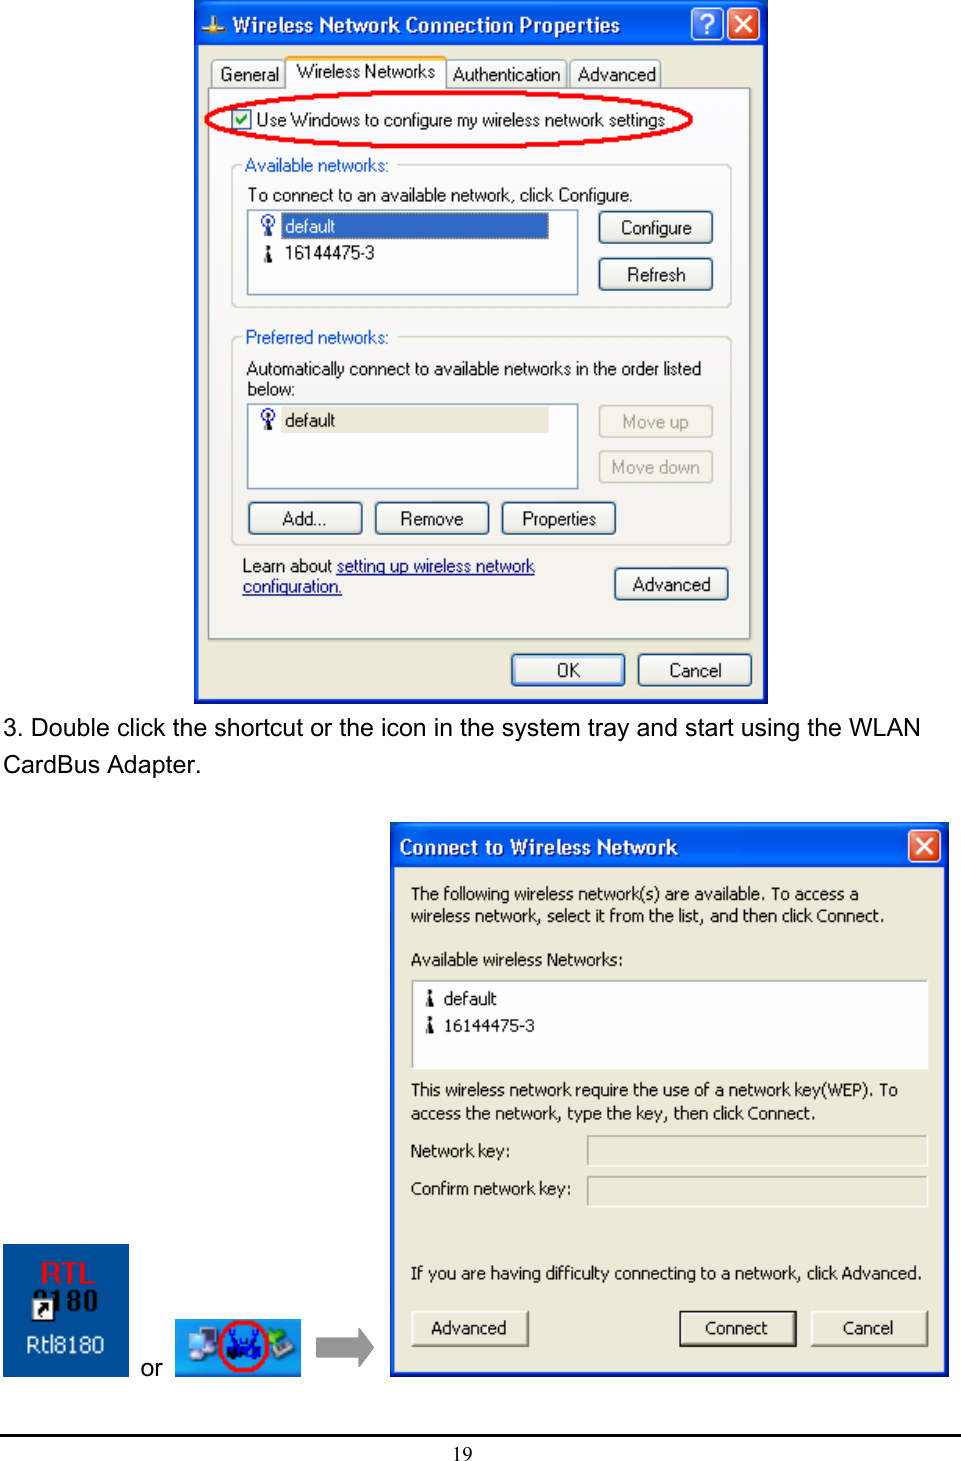  19   3. Double click the shortcut or the icon in the system tray and start using the WLAN CardBus Adapter.   or           